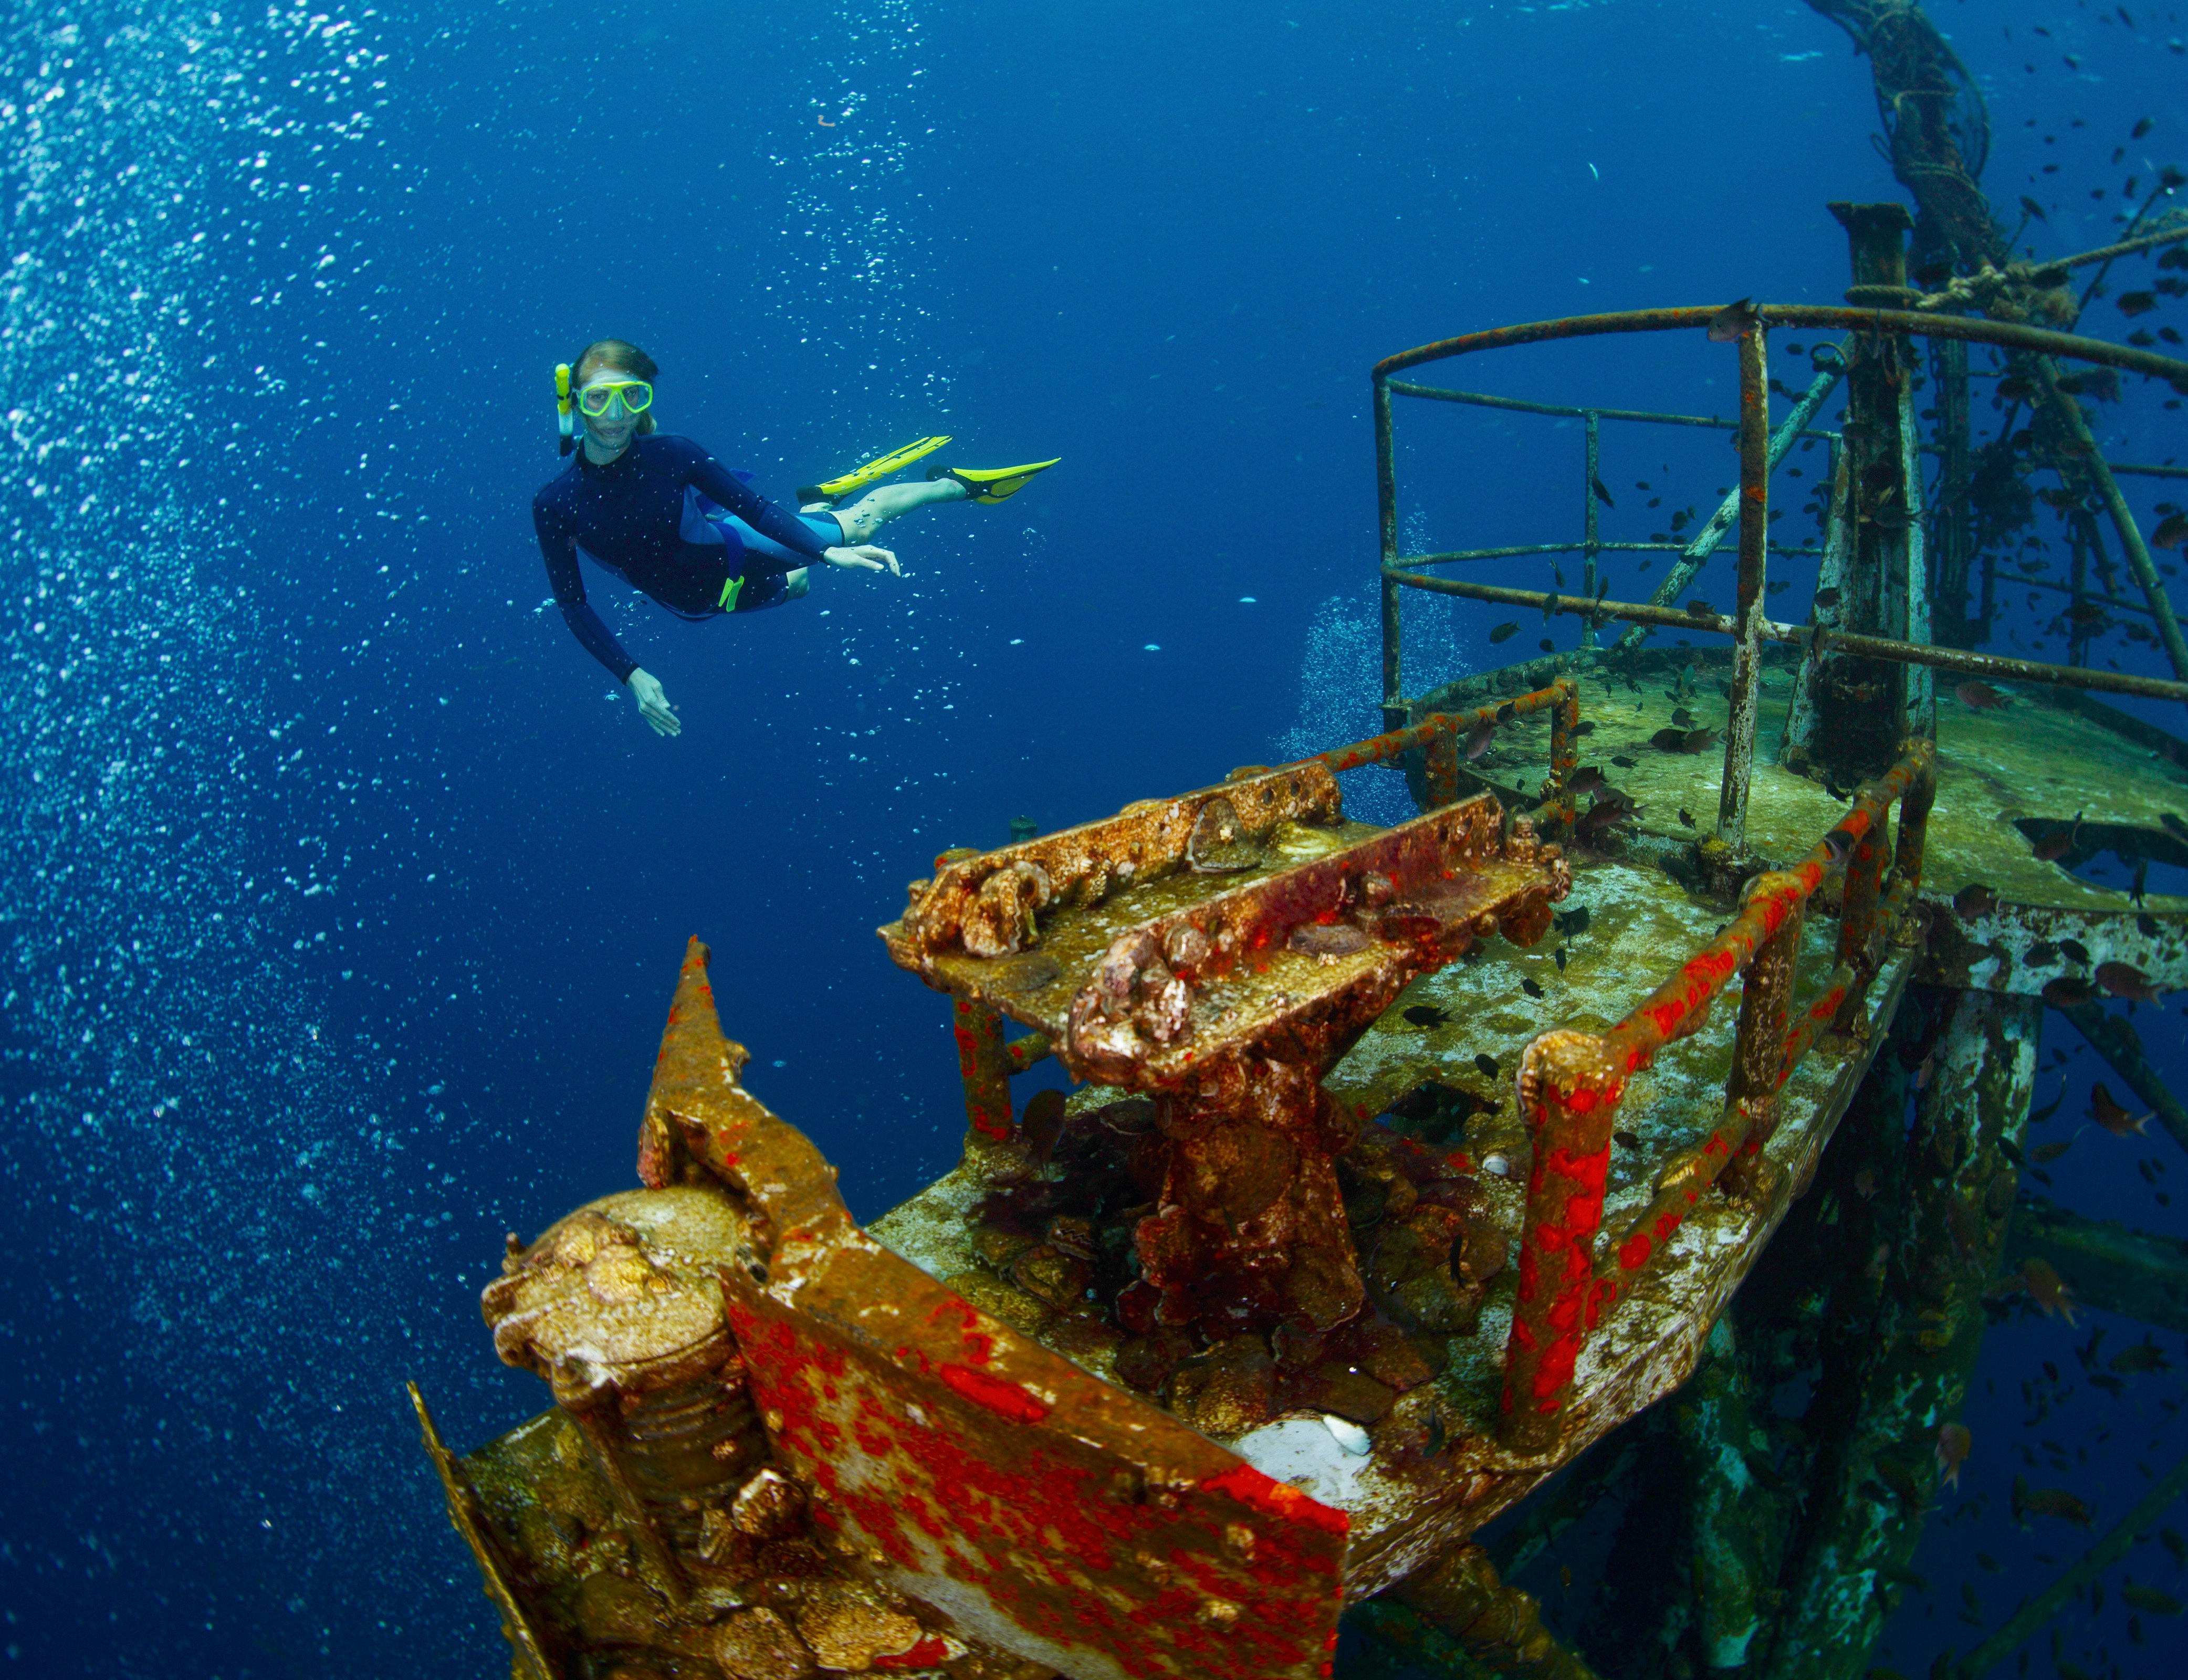 To dive to some of the wrecks you need a greater knowledge of breath-hold diving